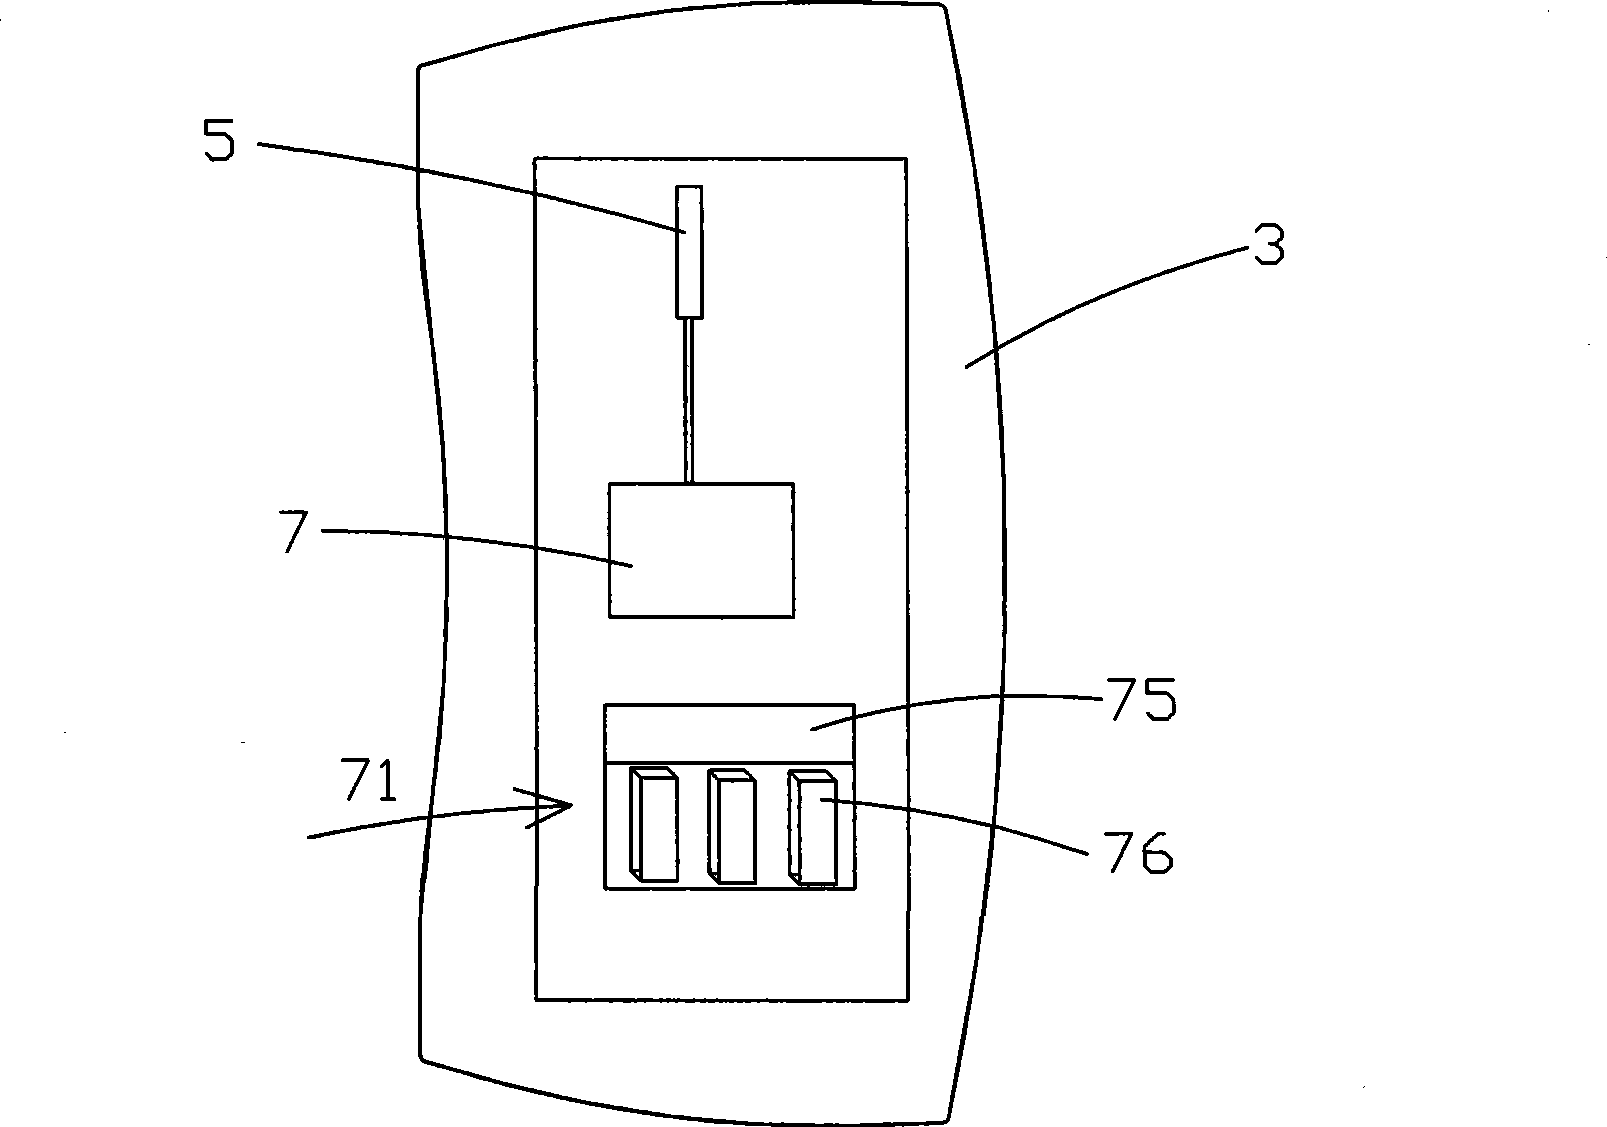 Novel treading apparatus capable of giving off light and playing music